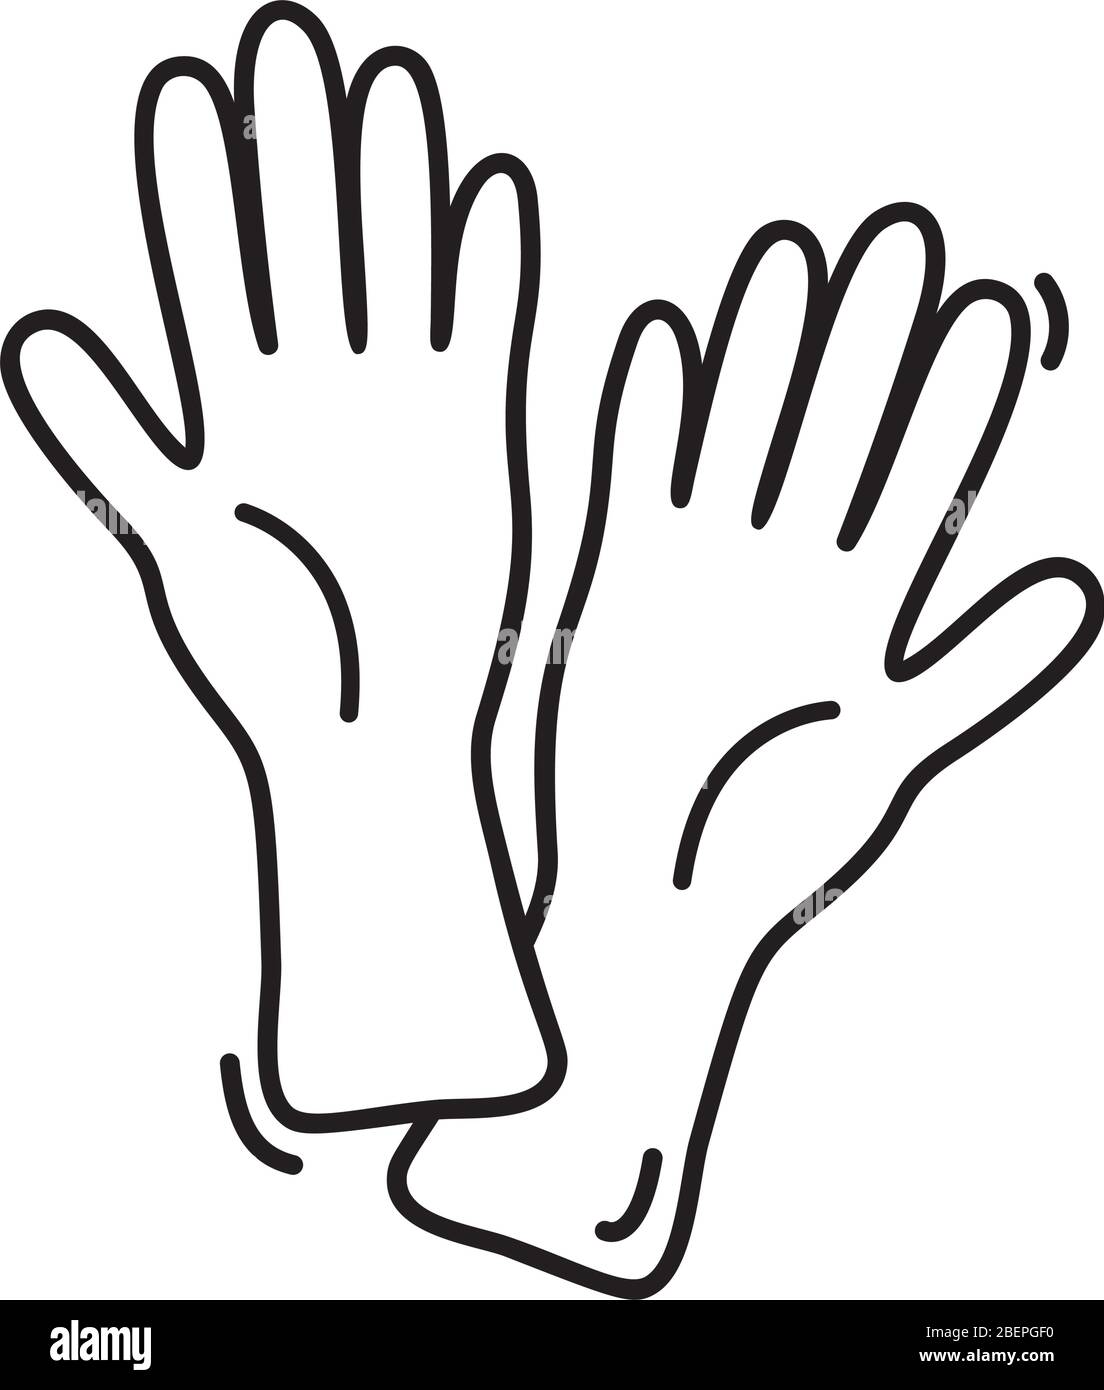 https://c8.alamy.com/comp/2BEPGF0/vector-medical-surgical-protective-rubber-gloves-icon-monoline-hand-drawn-latex-hand-protection-virus-sign-logo-housework-cleaning-equipment-symbol-2BEPGF0.jpg